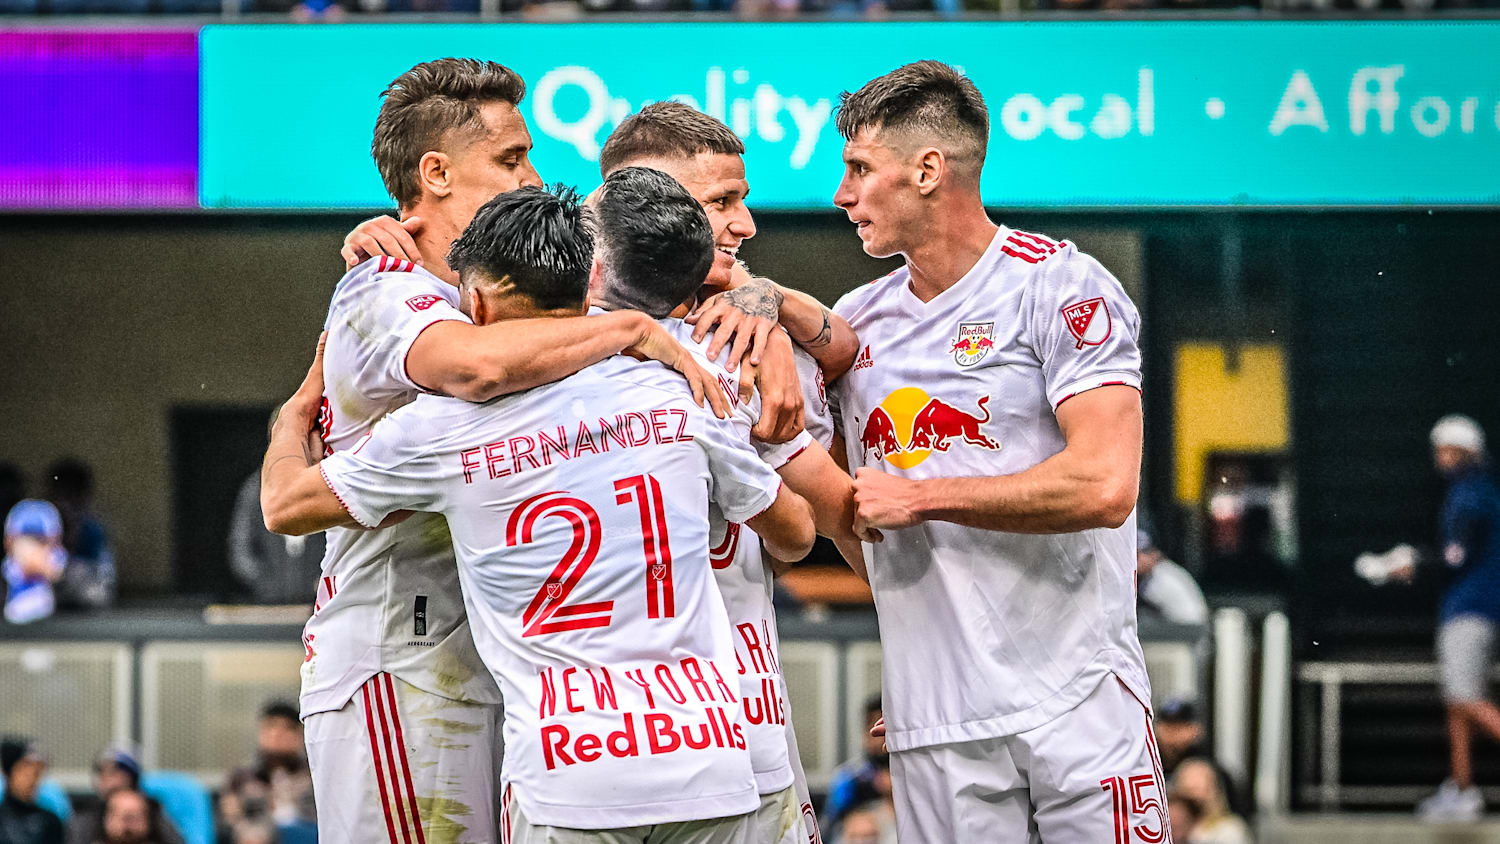 New York Red Bull vs. Atlético San Luis, Leagues Cup Group Stage